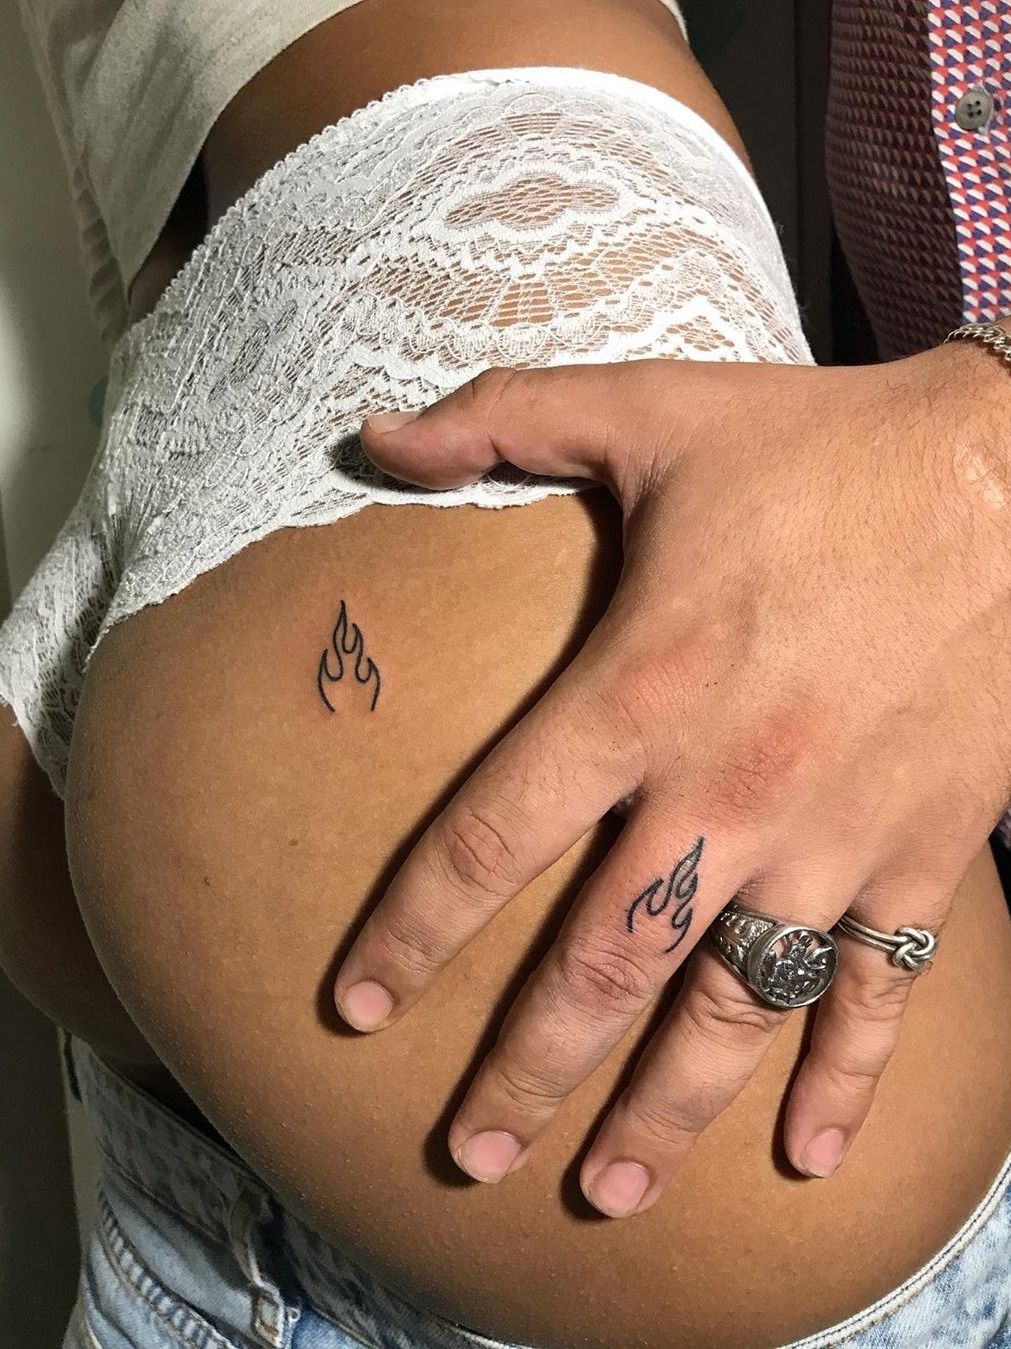 60 Meaningful Couple Tattoos To Strengthen The Bond